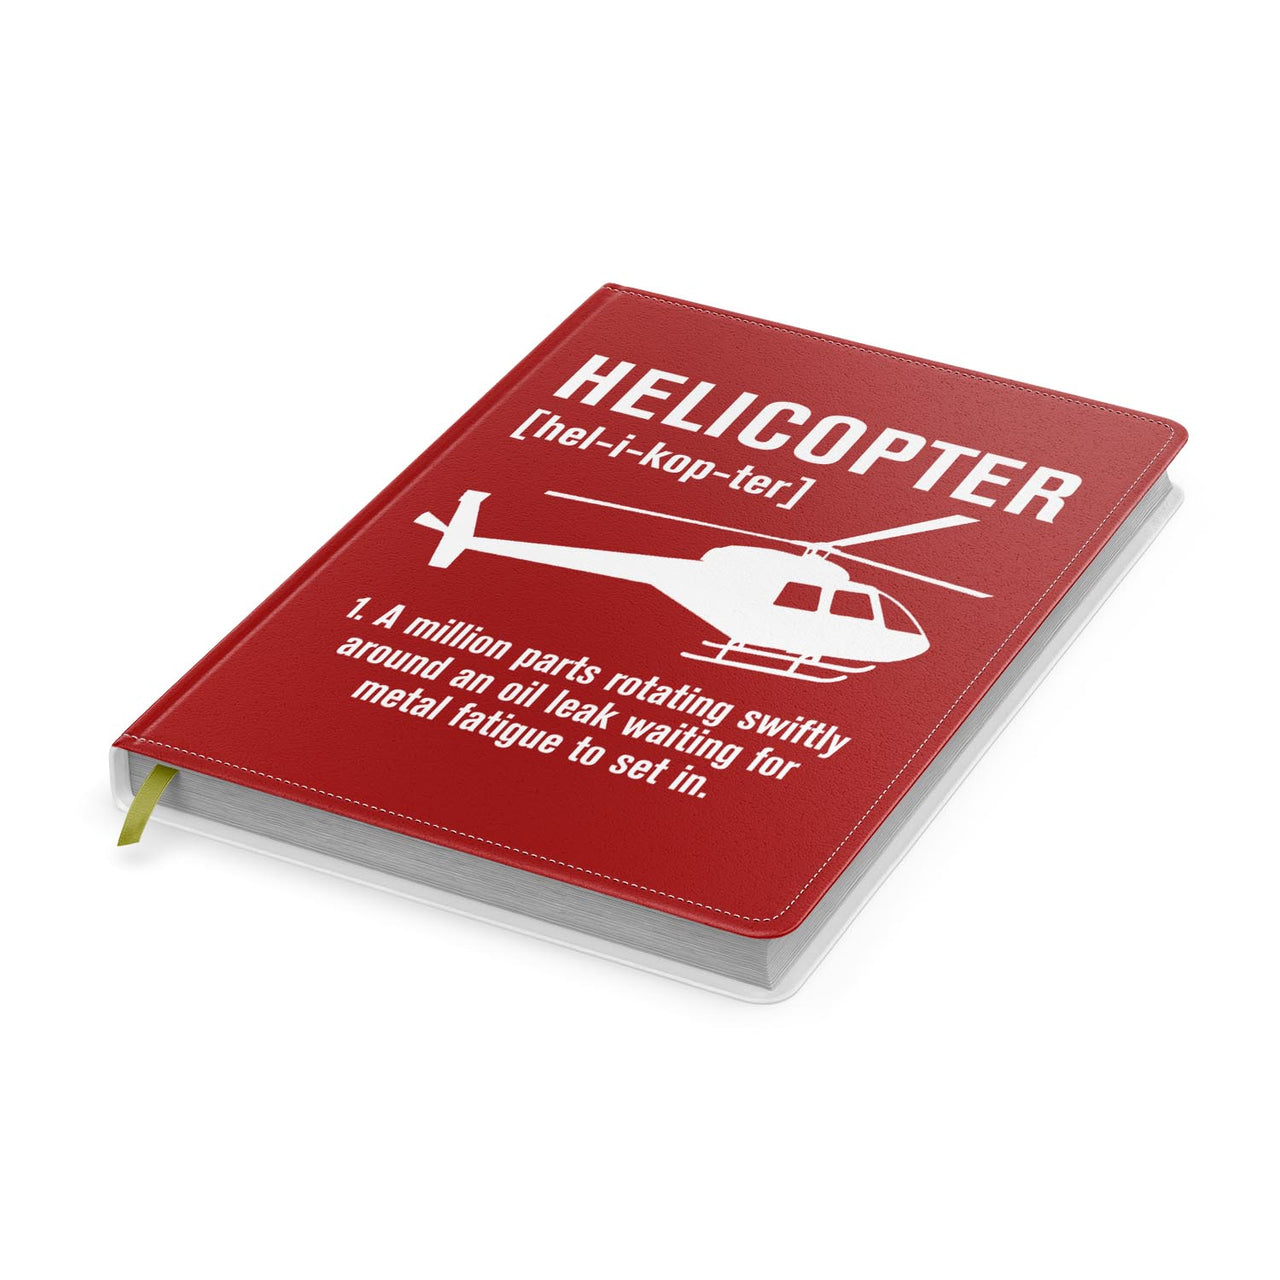 Helicopter [Noun] Designed Notebooks